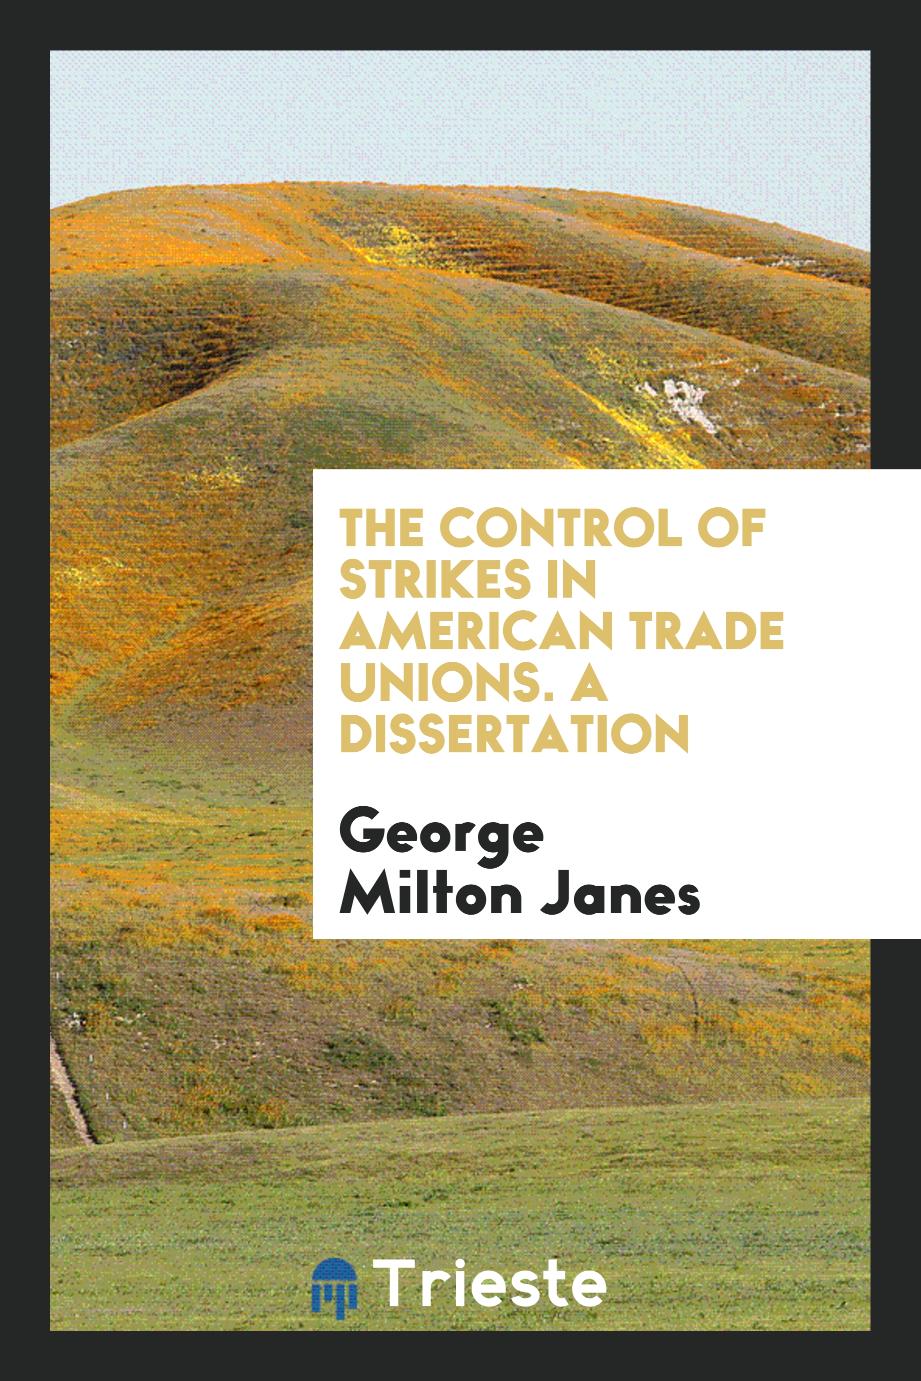 The Control of Strikes in American Trade Unions. A Dissertation